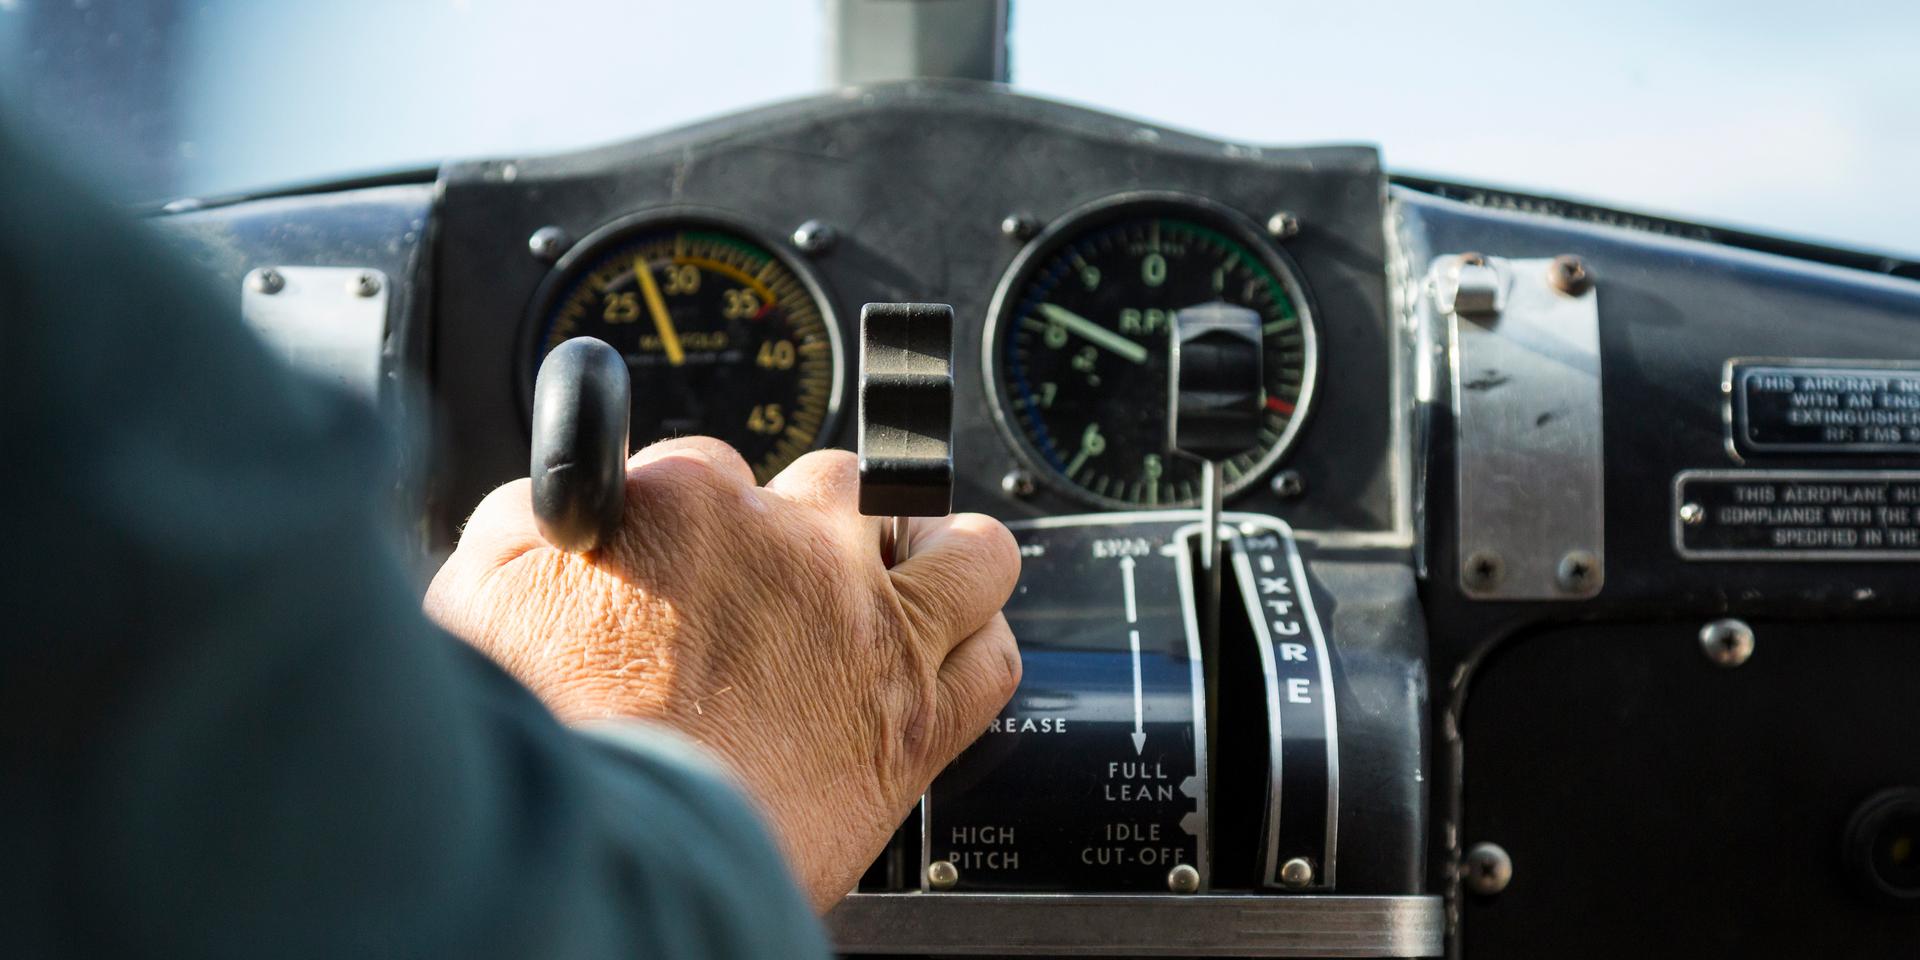 pilot hand pushing a lever in a plane cockpit